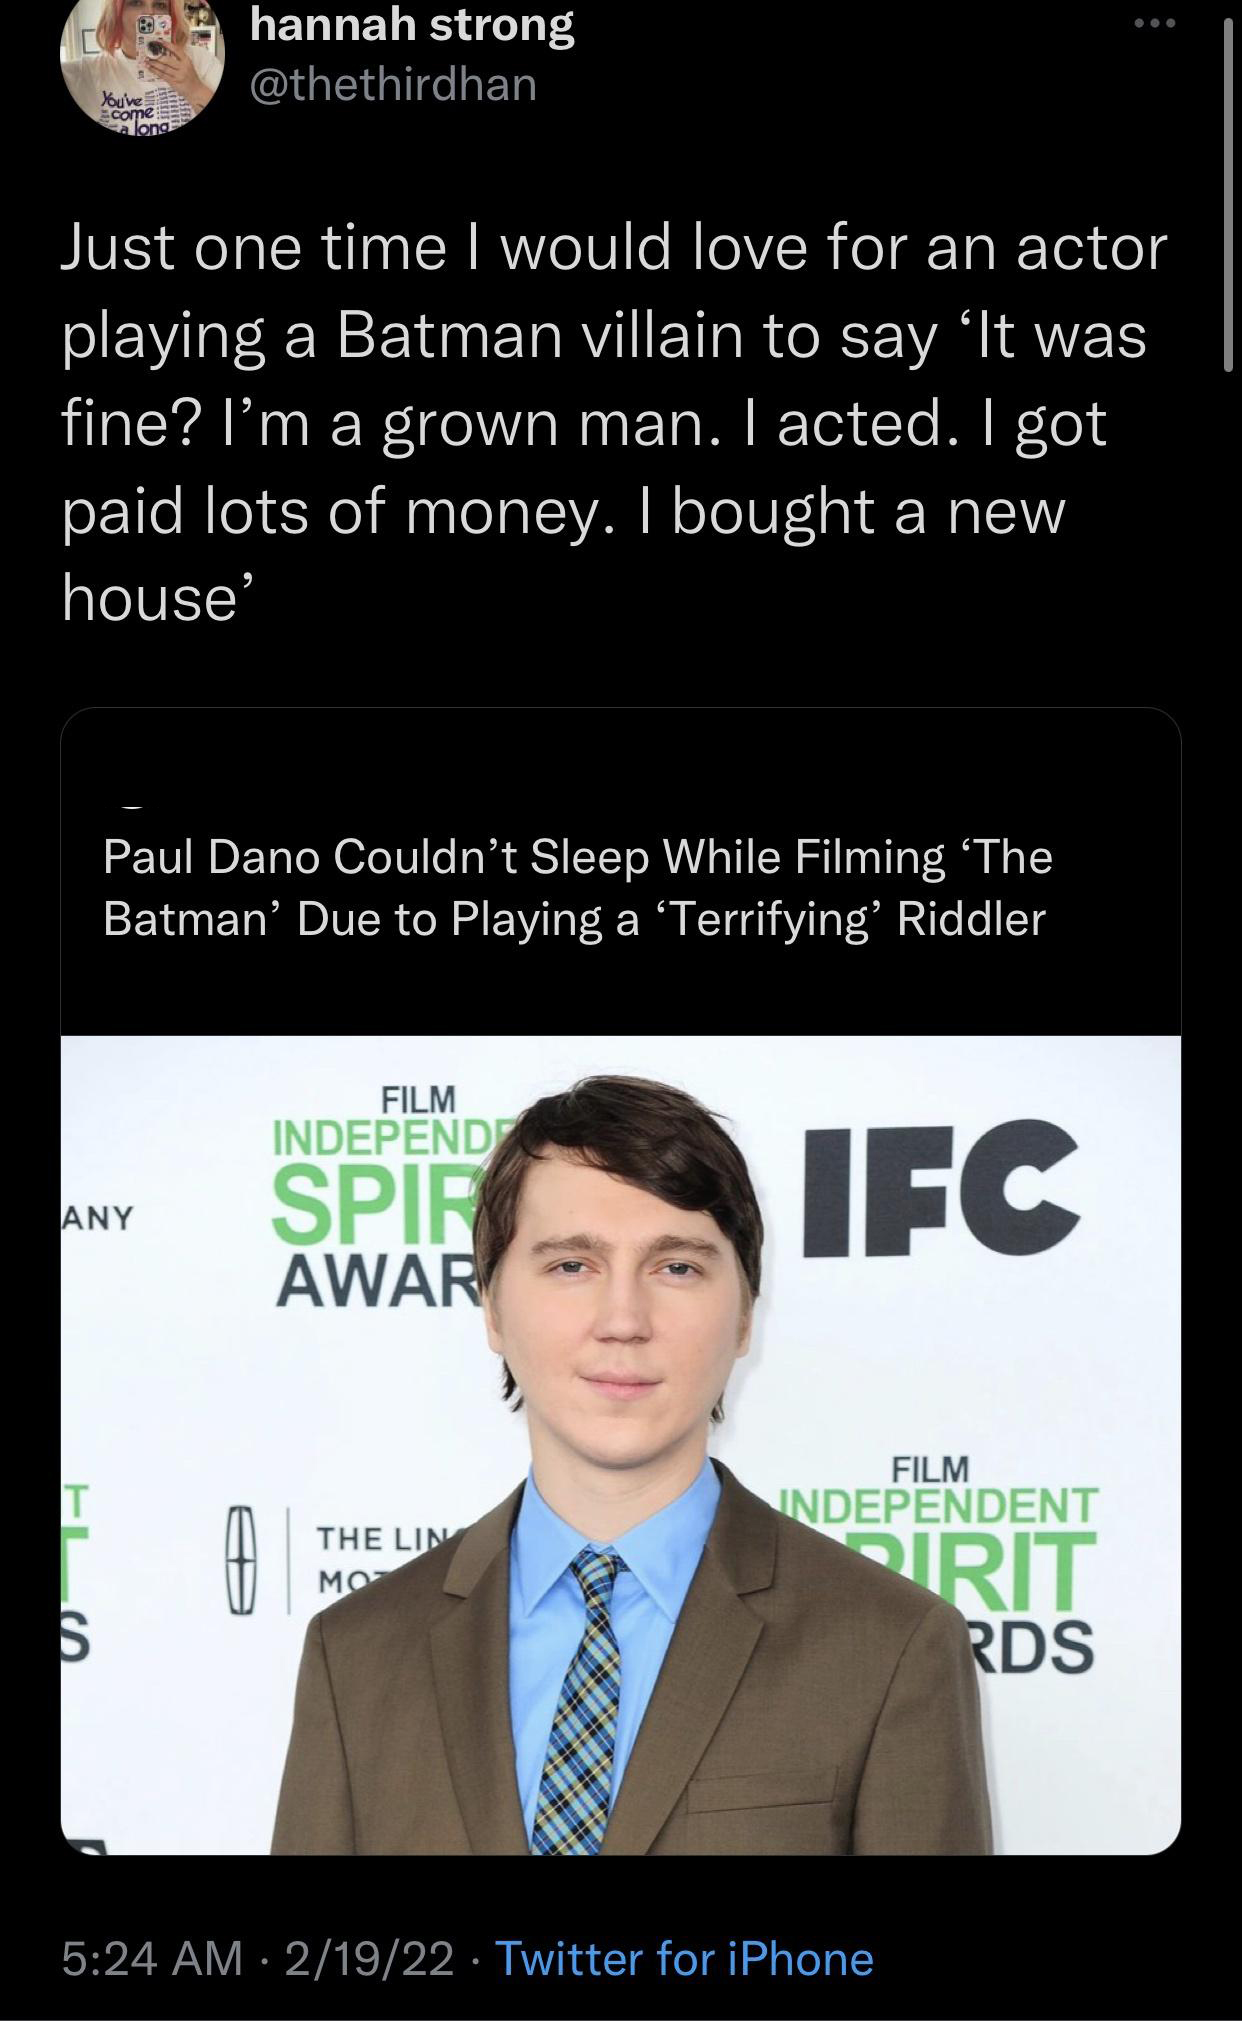 funny tweets - photo caption - hannah strong Just one time I would love for an actor playing a Batman villain to say It was fine? I'm a grown man. I acted. I got paid lots of money. I bought a new house' Paul Dano Couldn't Sleep While Filming 'The Batman'